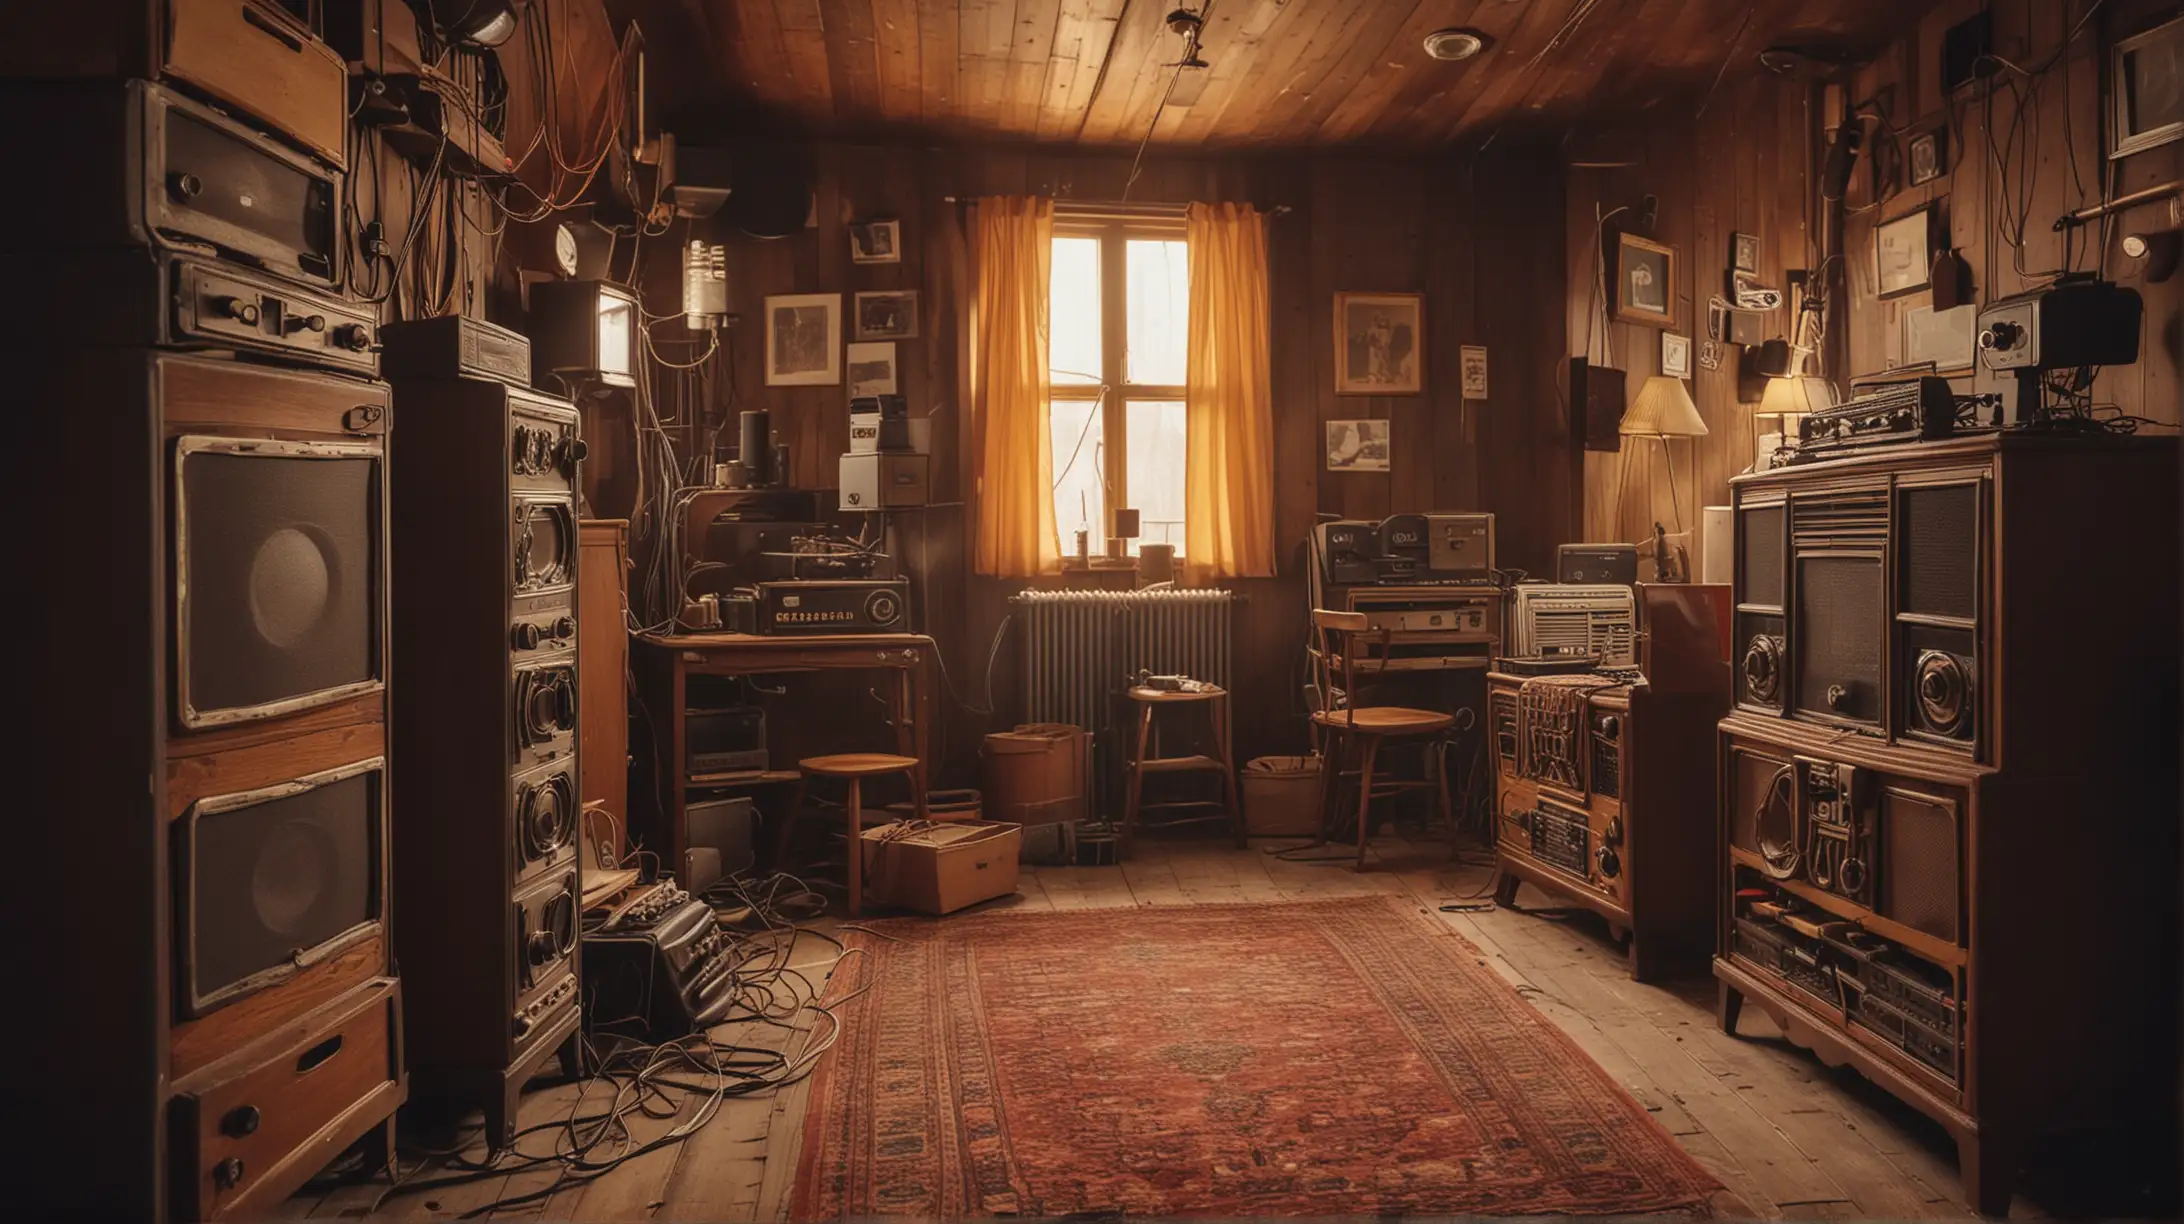 Vintage Radio Room with Industrial Aesthetic and Cinematic Lighting